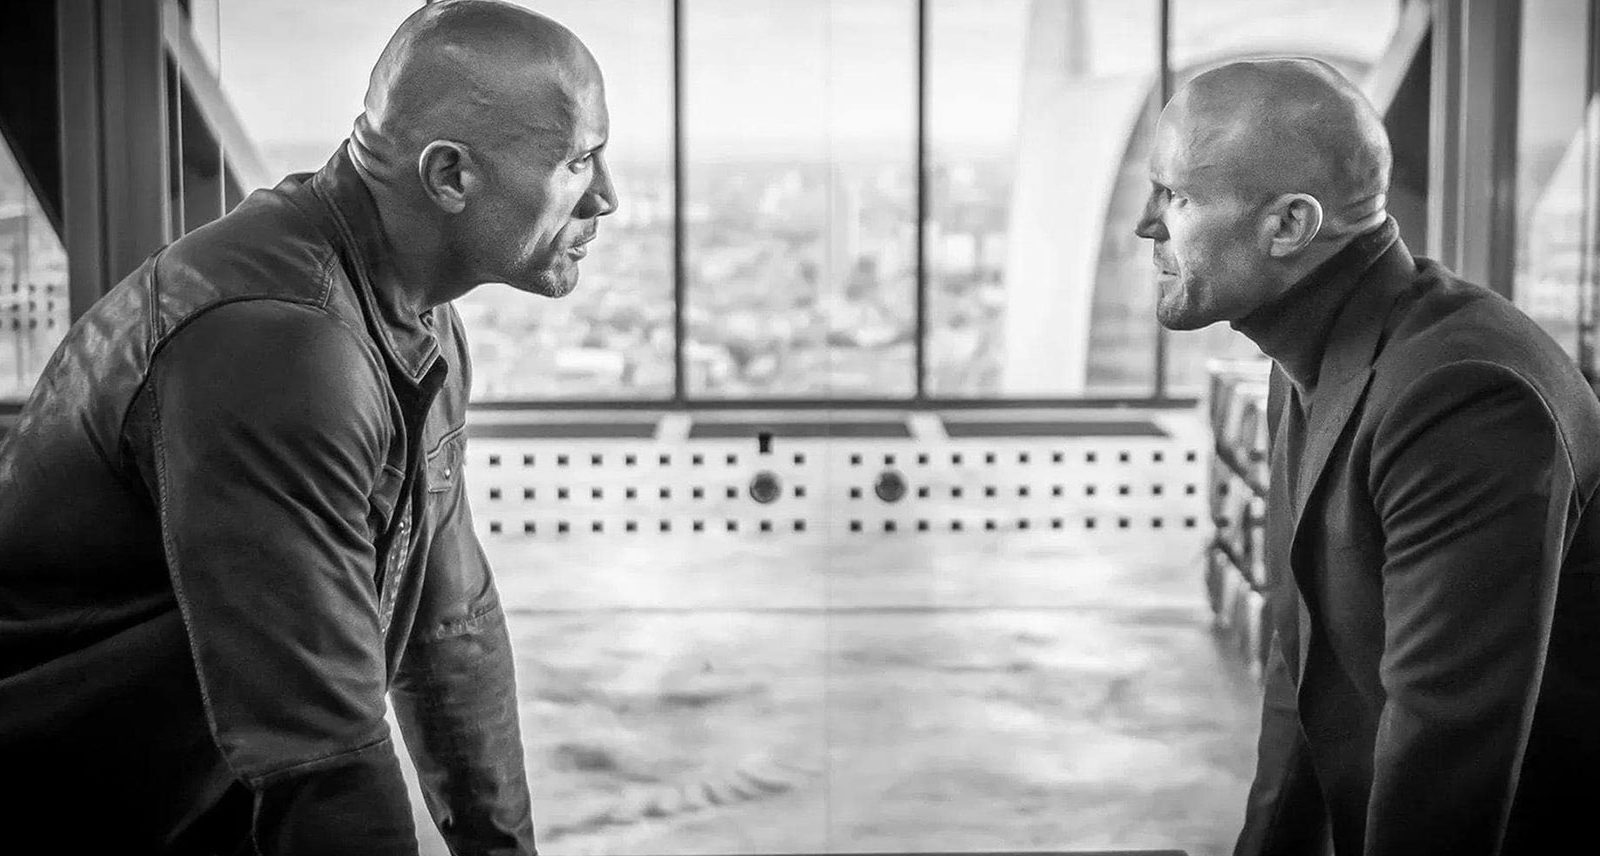 The ‘Hobbs & Shaw’ Trailer Is Here to Tickle Your Lizard Brain